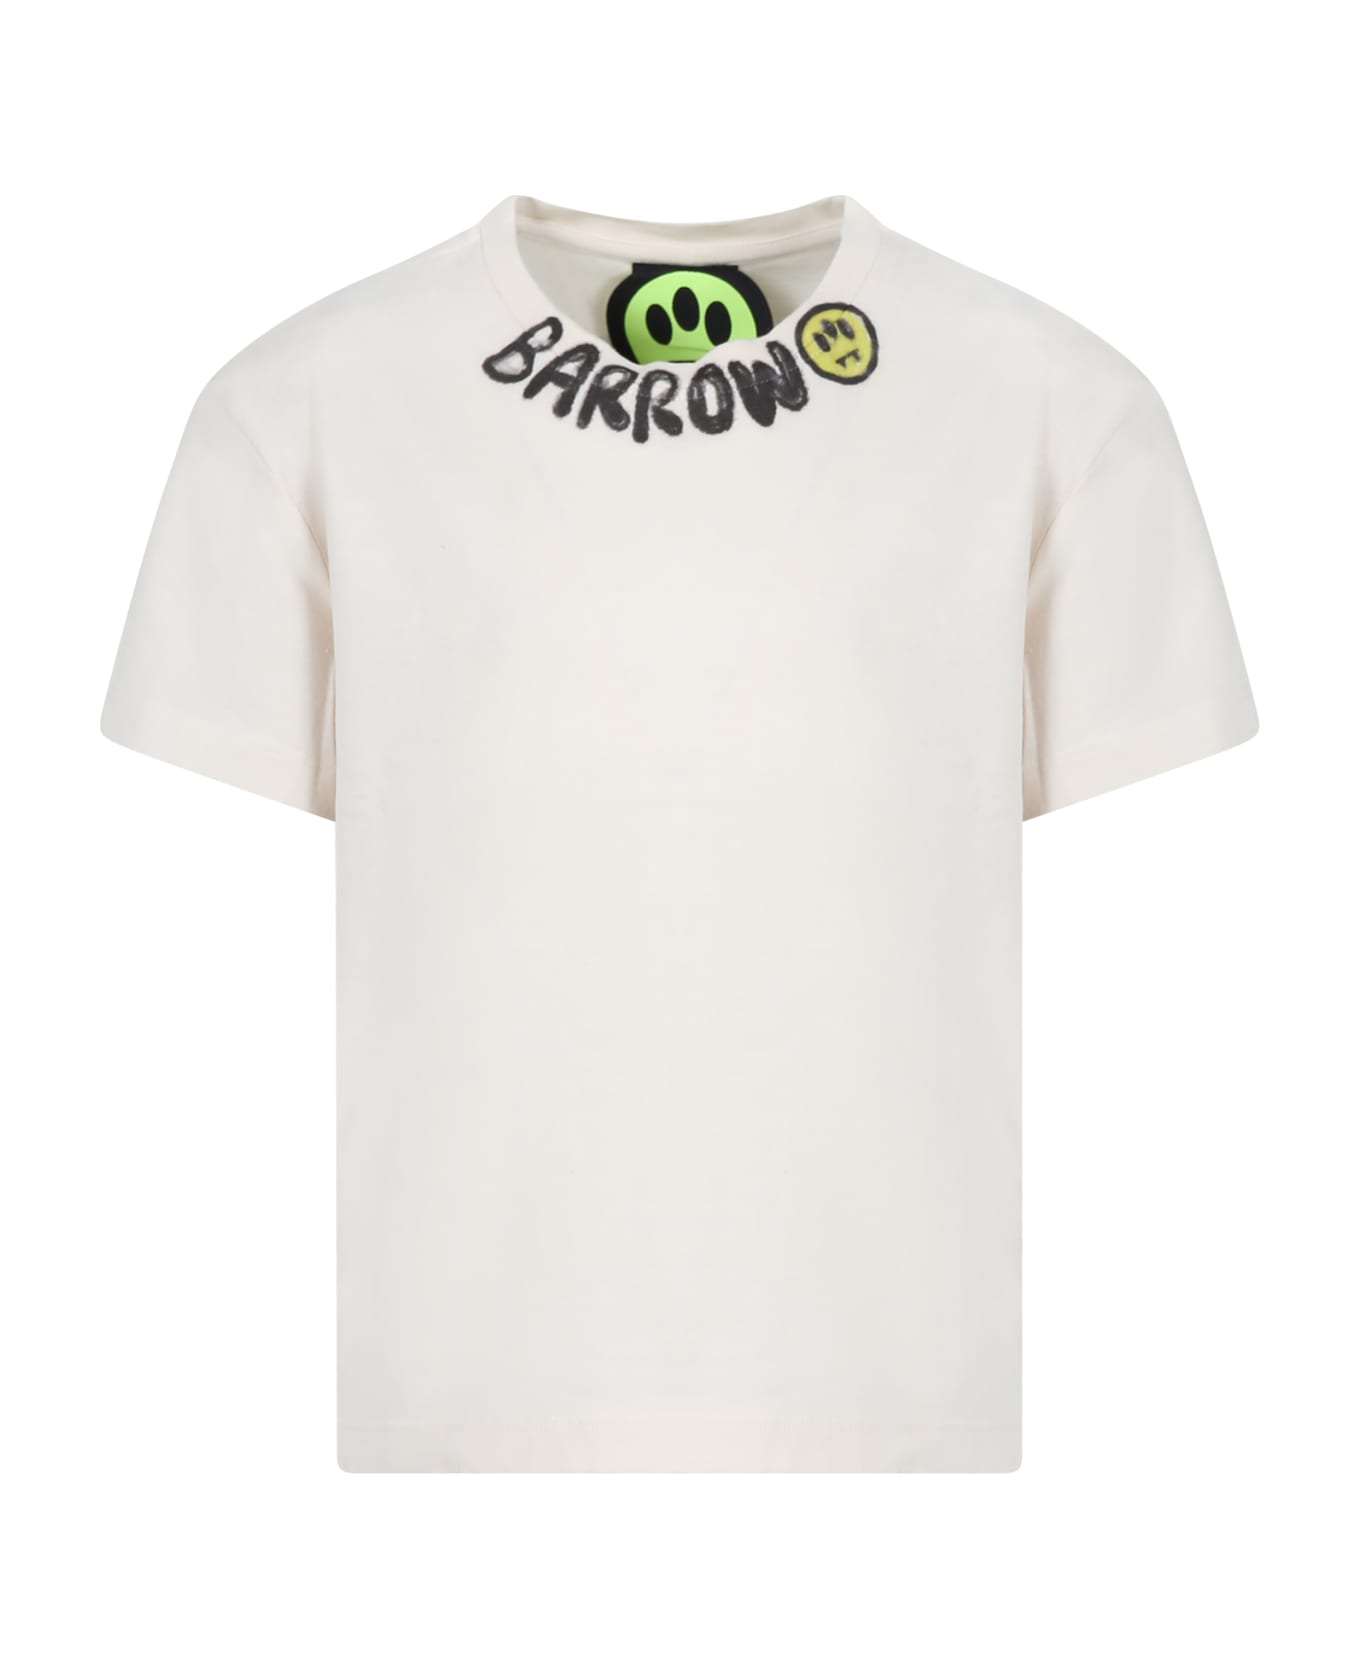 Barrow Ivory T-shirt For Kids With Logo - Ivory